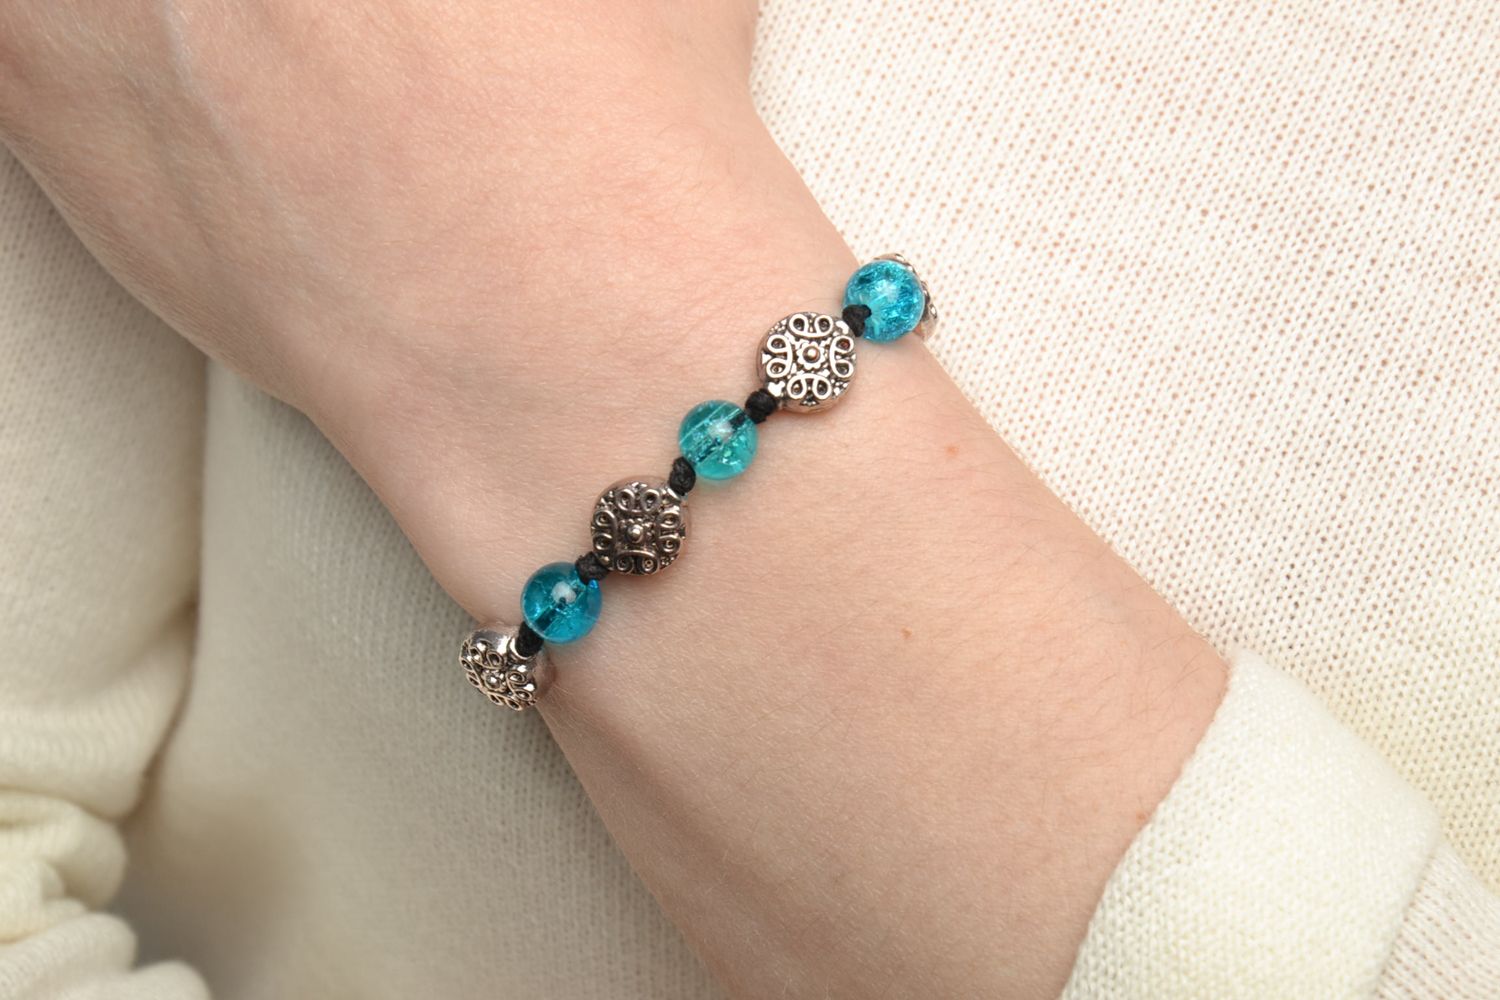 Bracelet with glass beads and metal elements photo 5